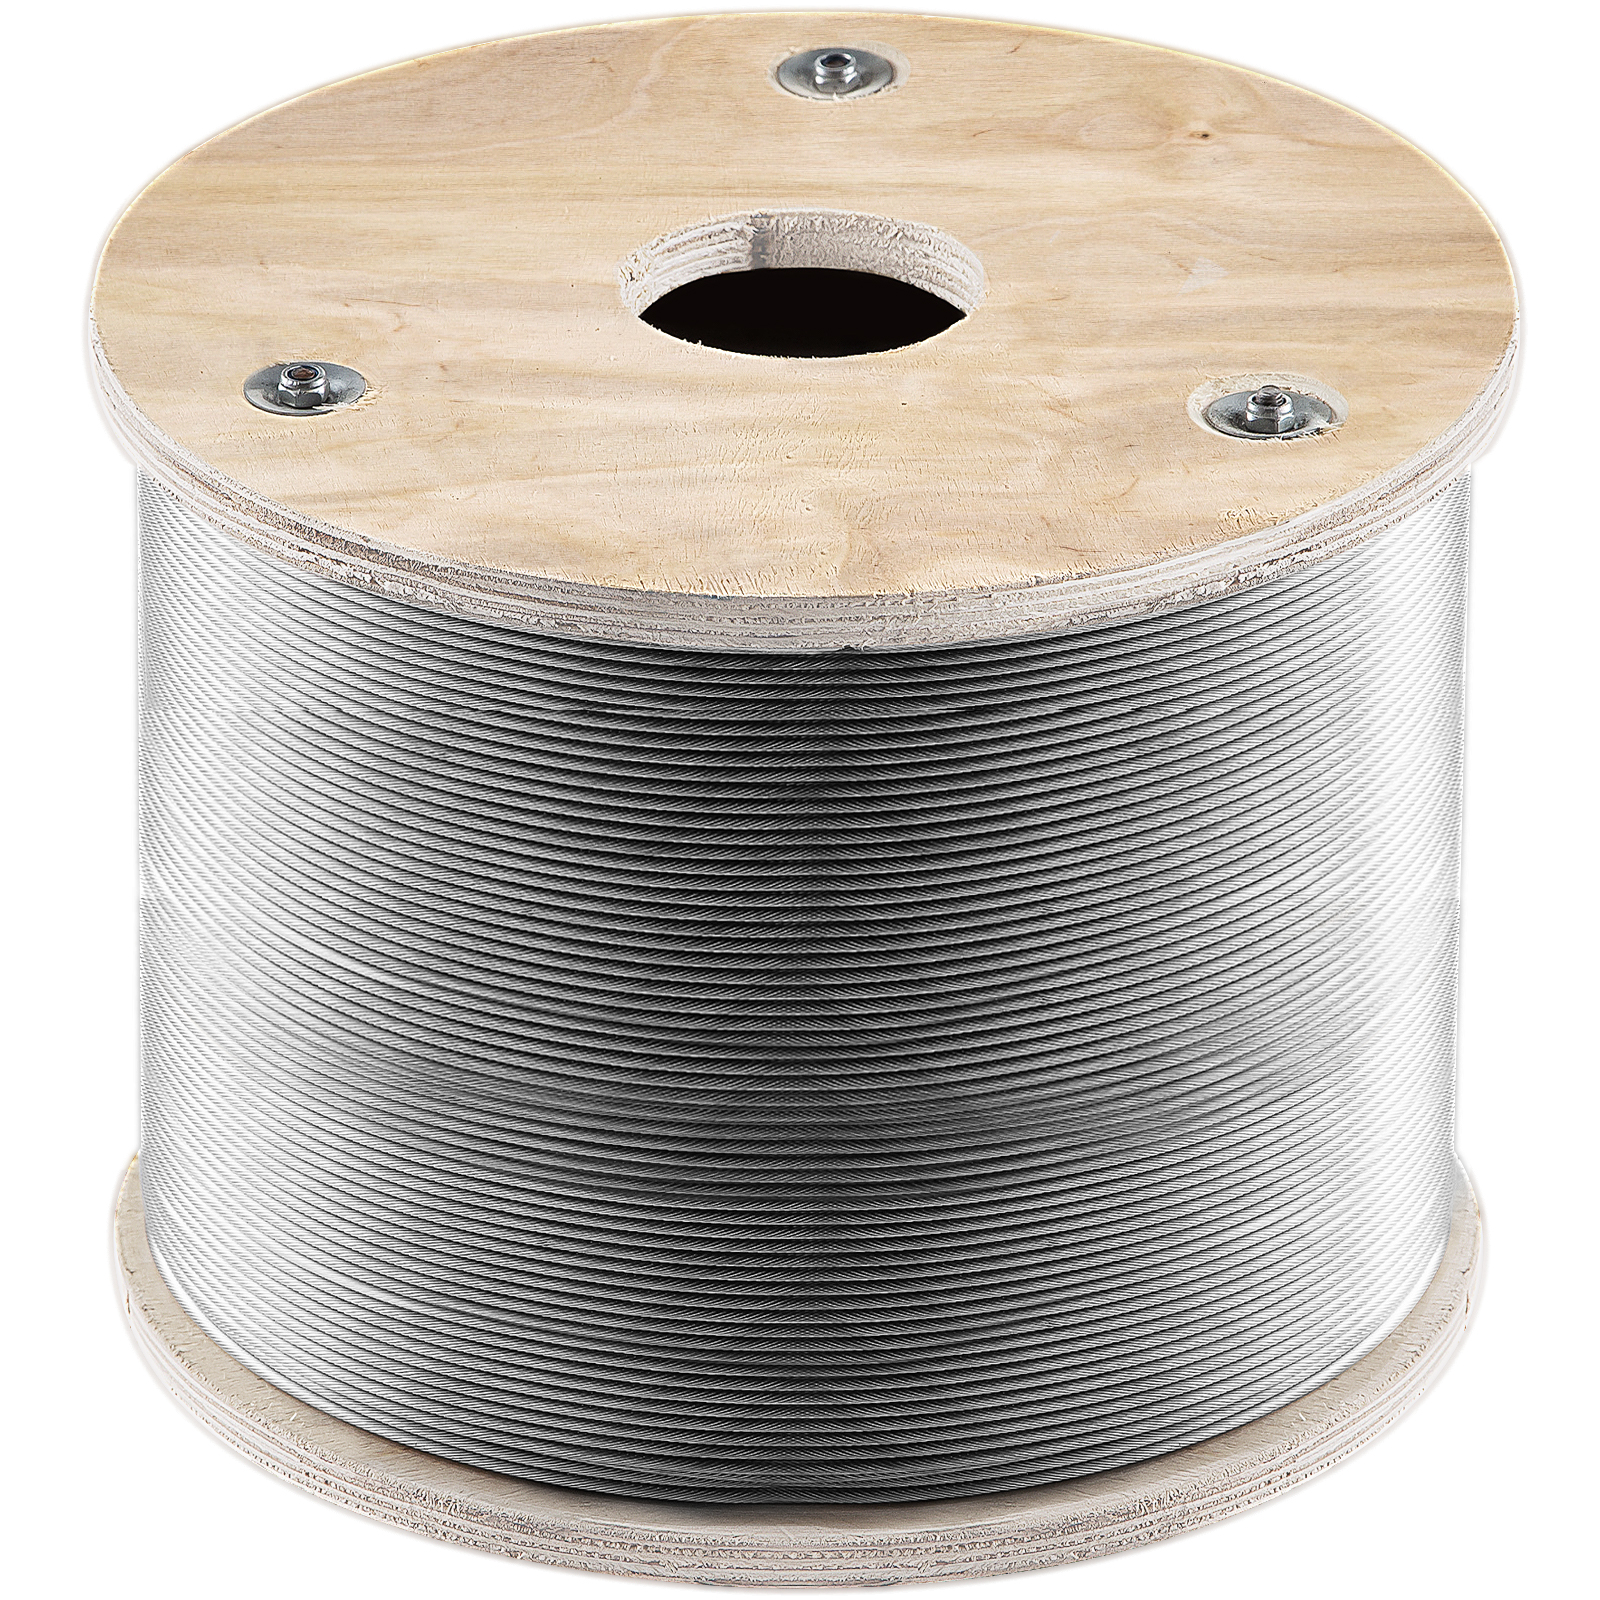 VEVOR 316 Stainless Steel Wire Rope 1/8in Steel Wire Cable 500ft Aircraft Cable w/ 7x7 Strands Core Steel Cable Wire 1700lbs Breaking Strength for